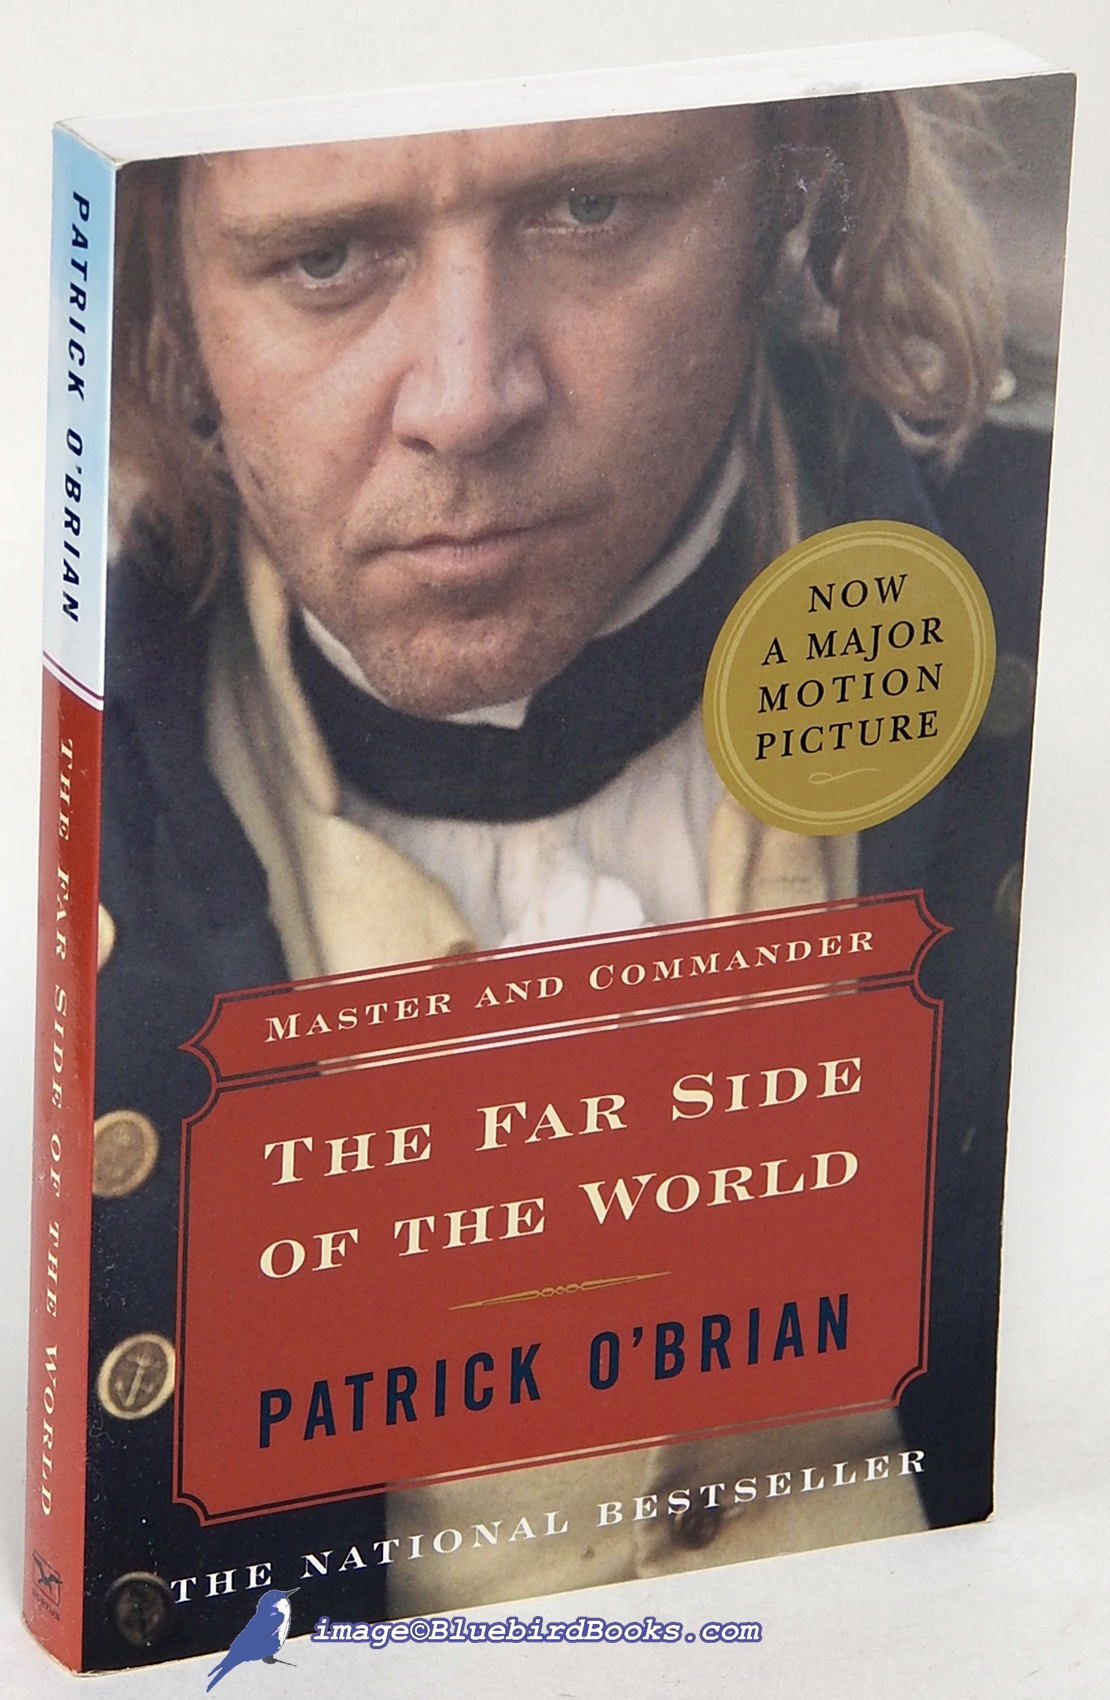 O'BRIAN, PATRICK - The Far Side of the World (Movie Tie-in Edition)